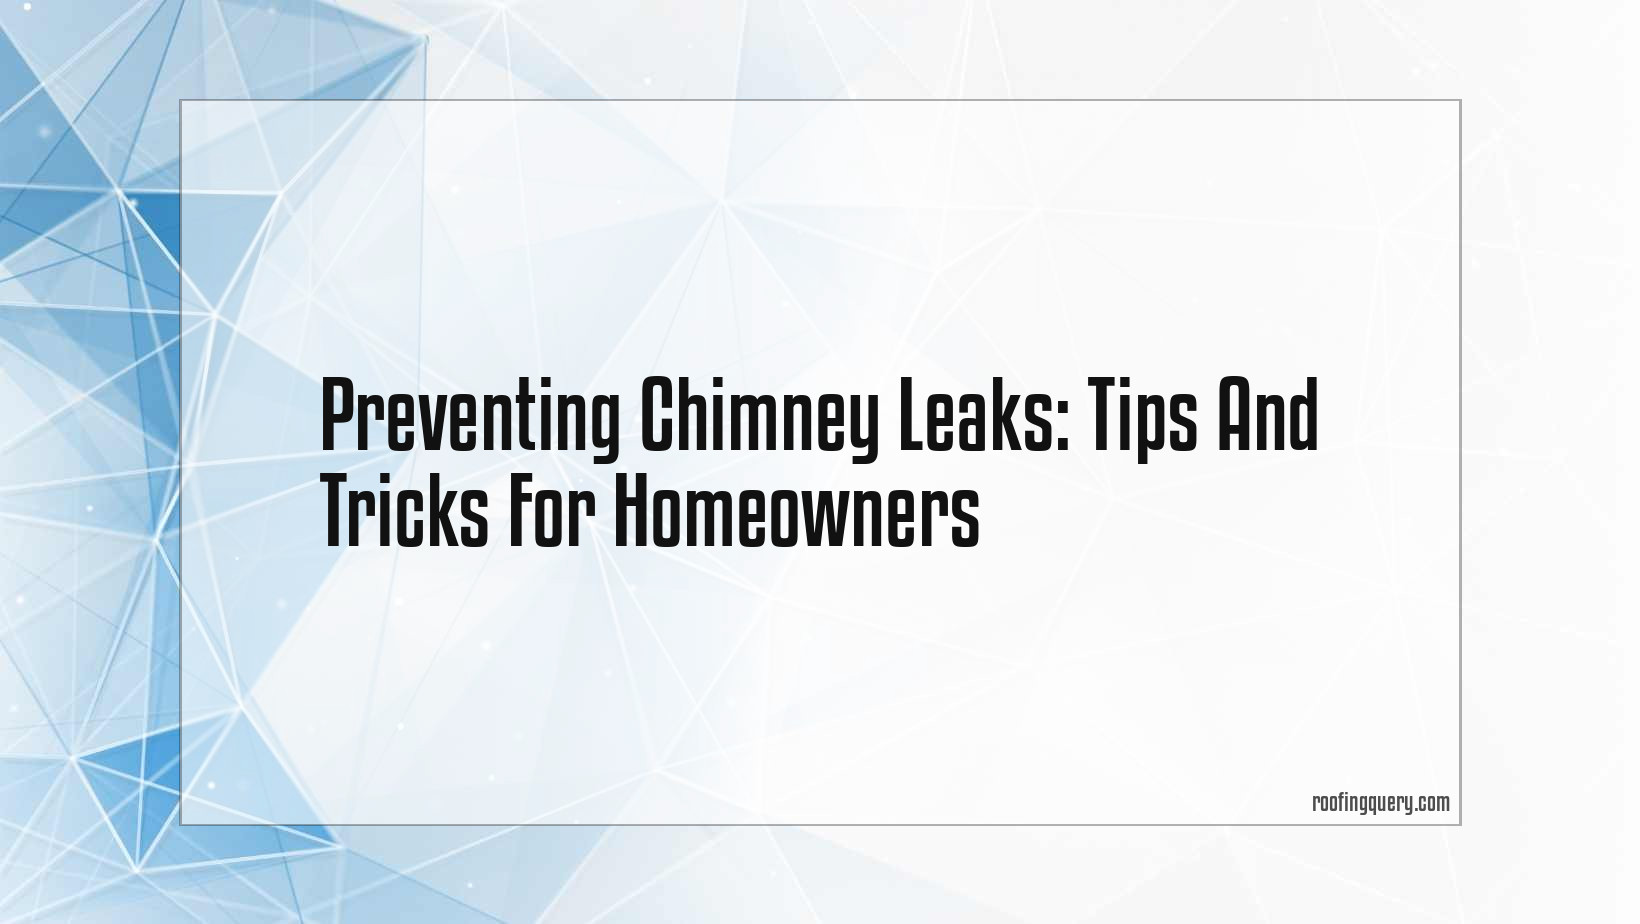 Preventing Chimney Leaks: Tips And Tricks For Homeowners